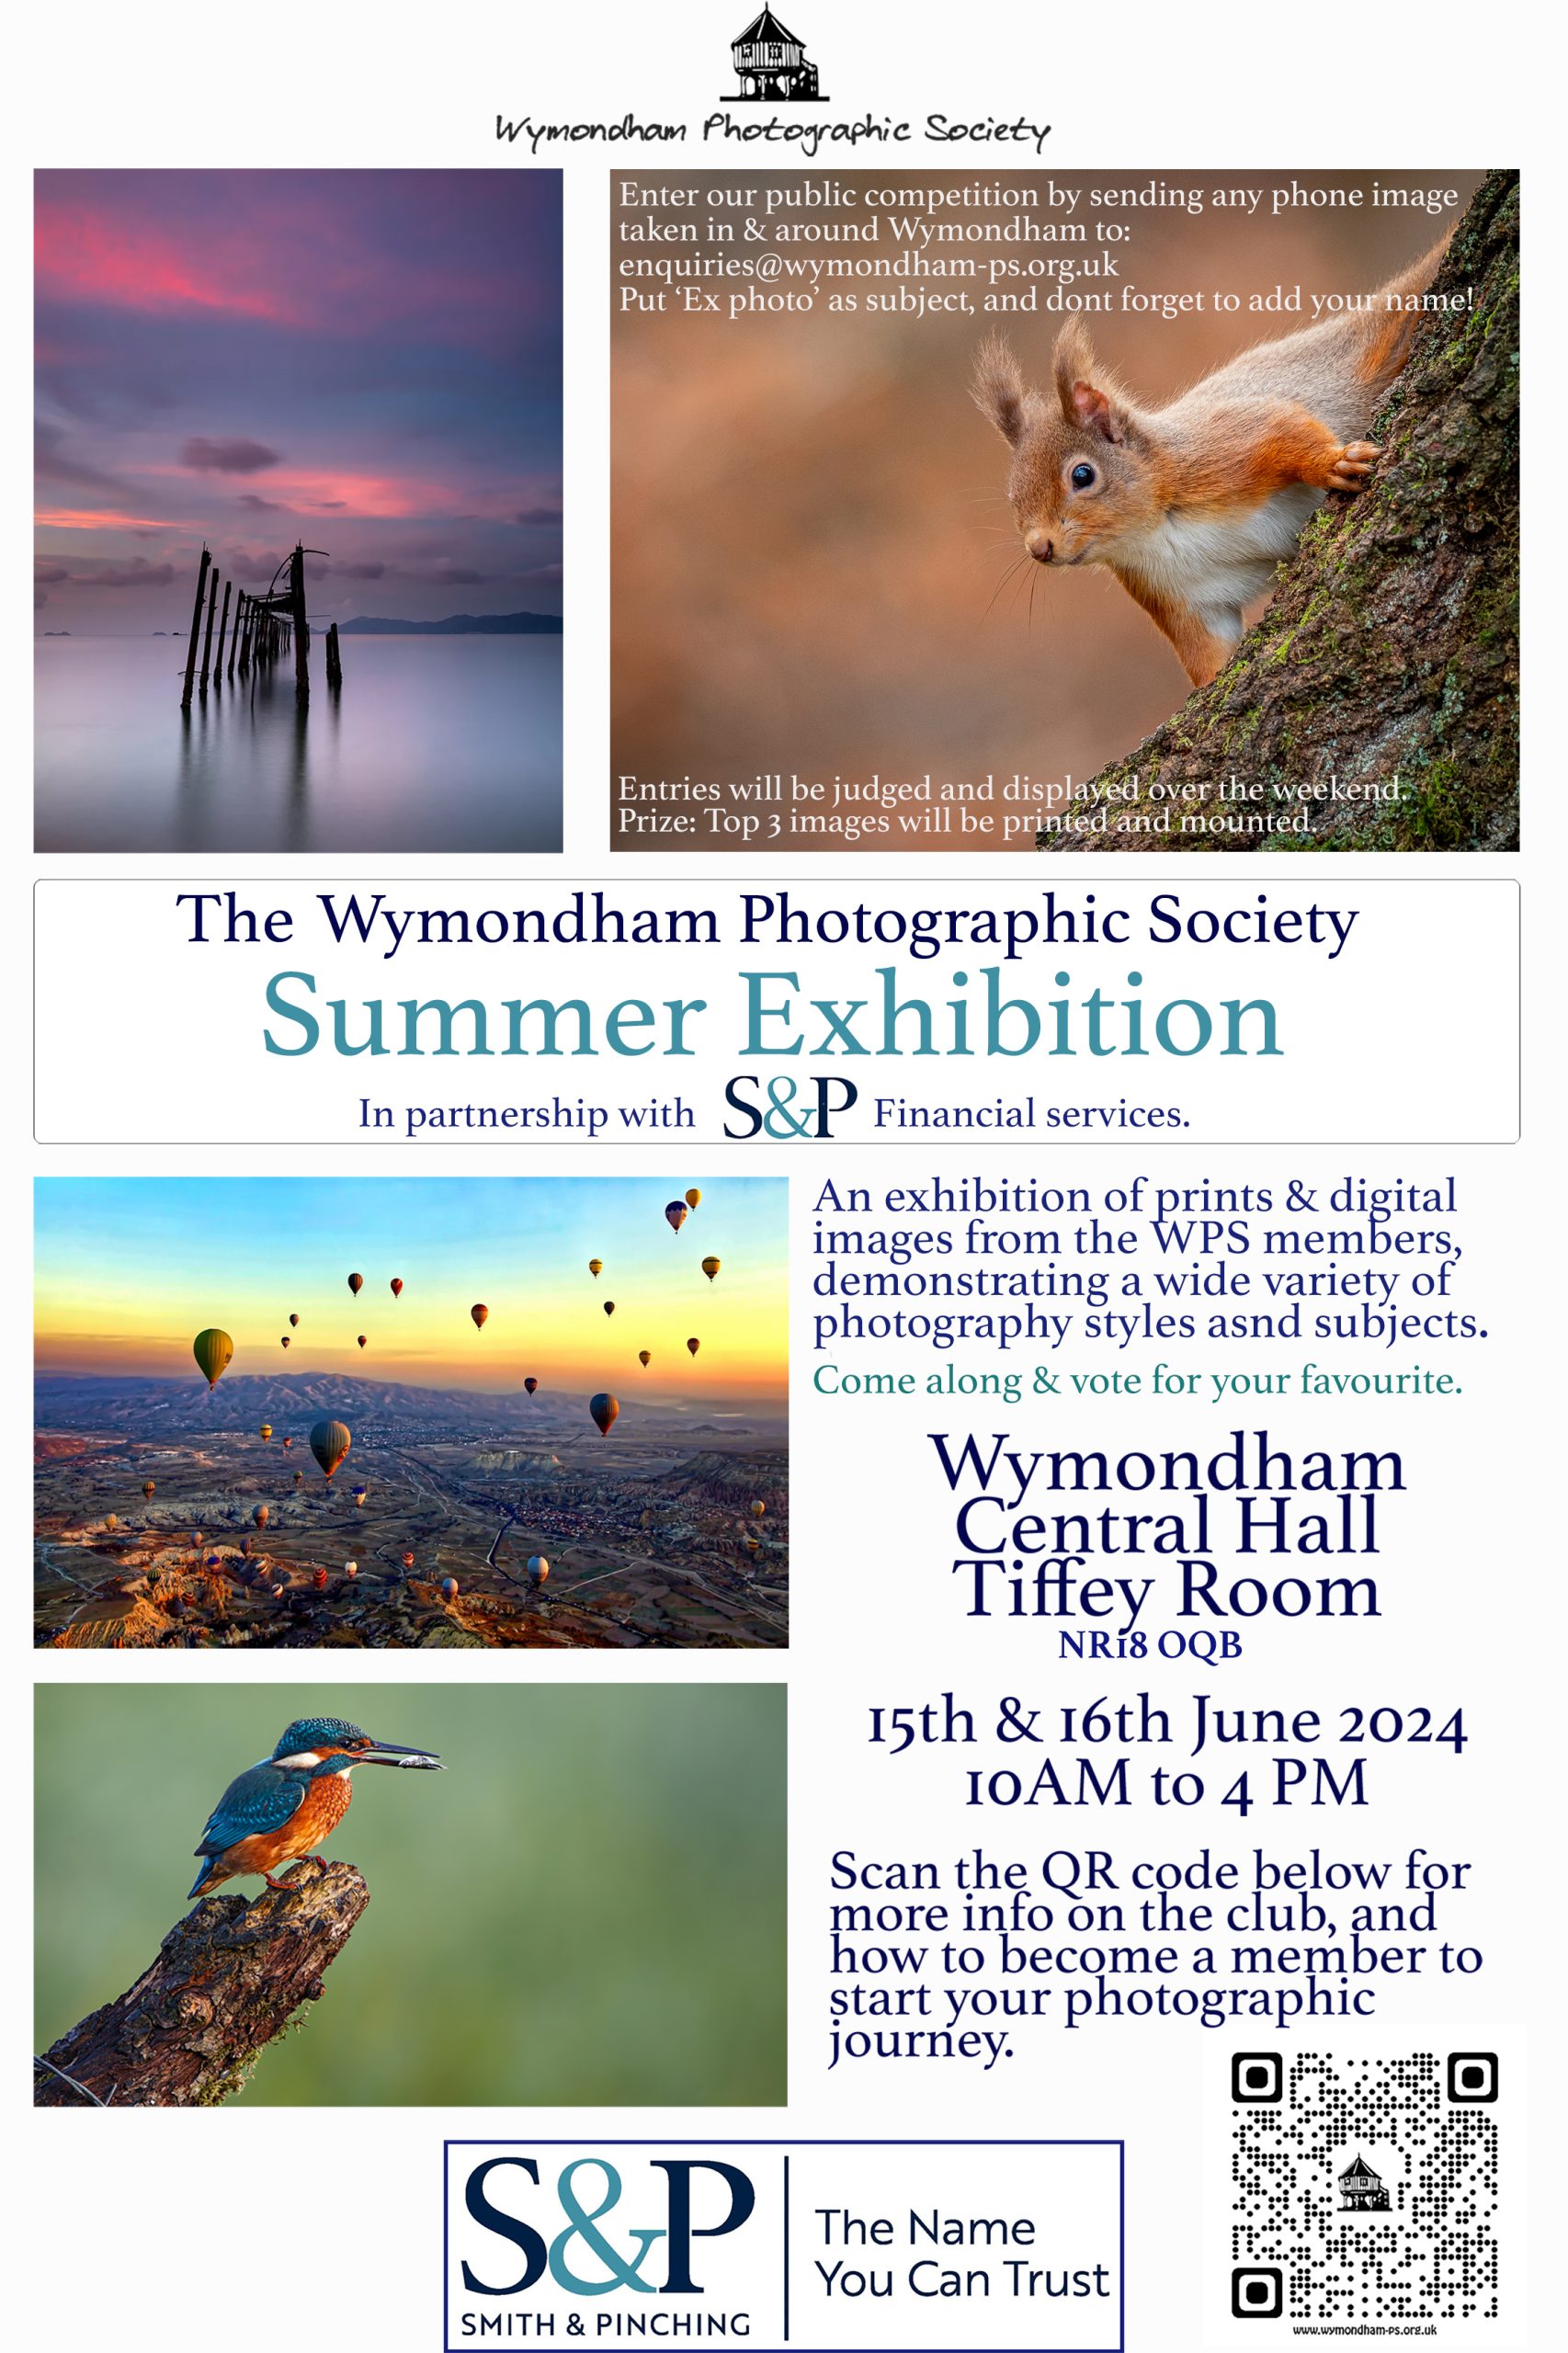 Photographic Society Event Poster